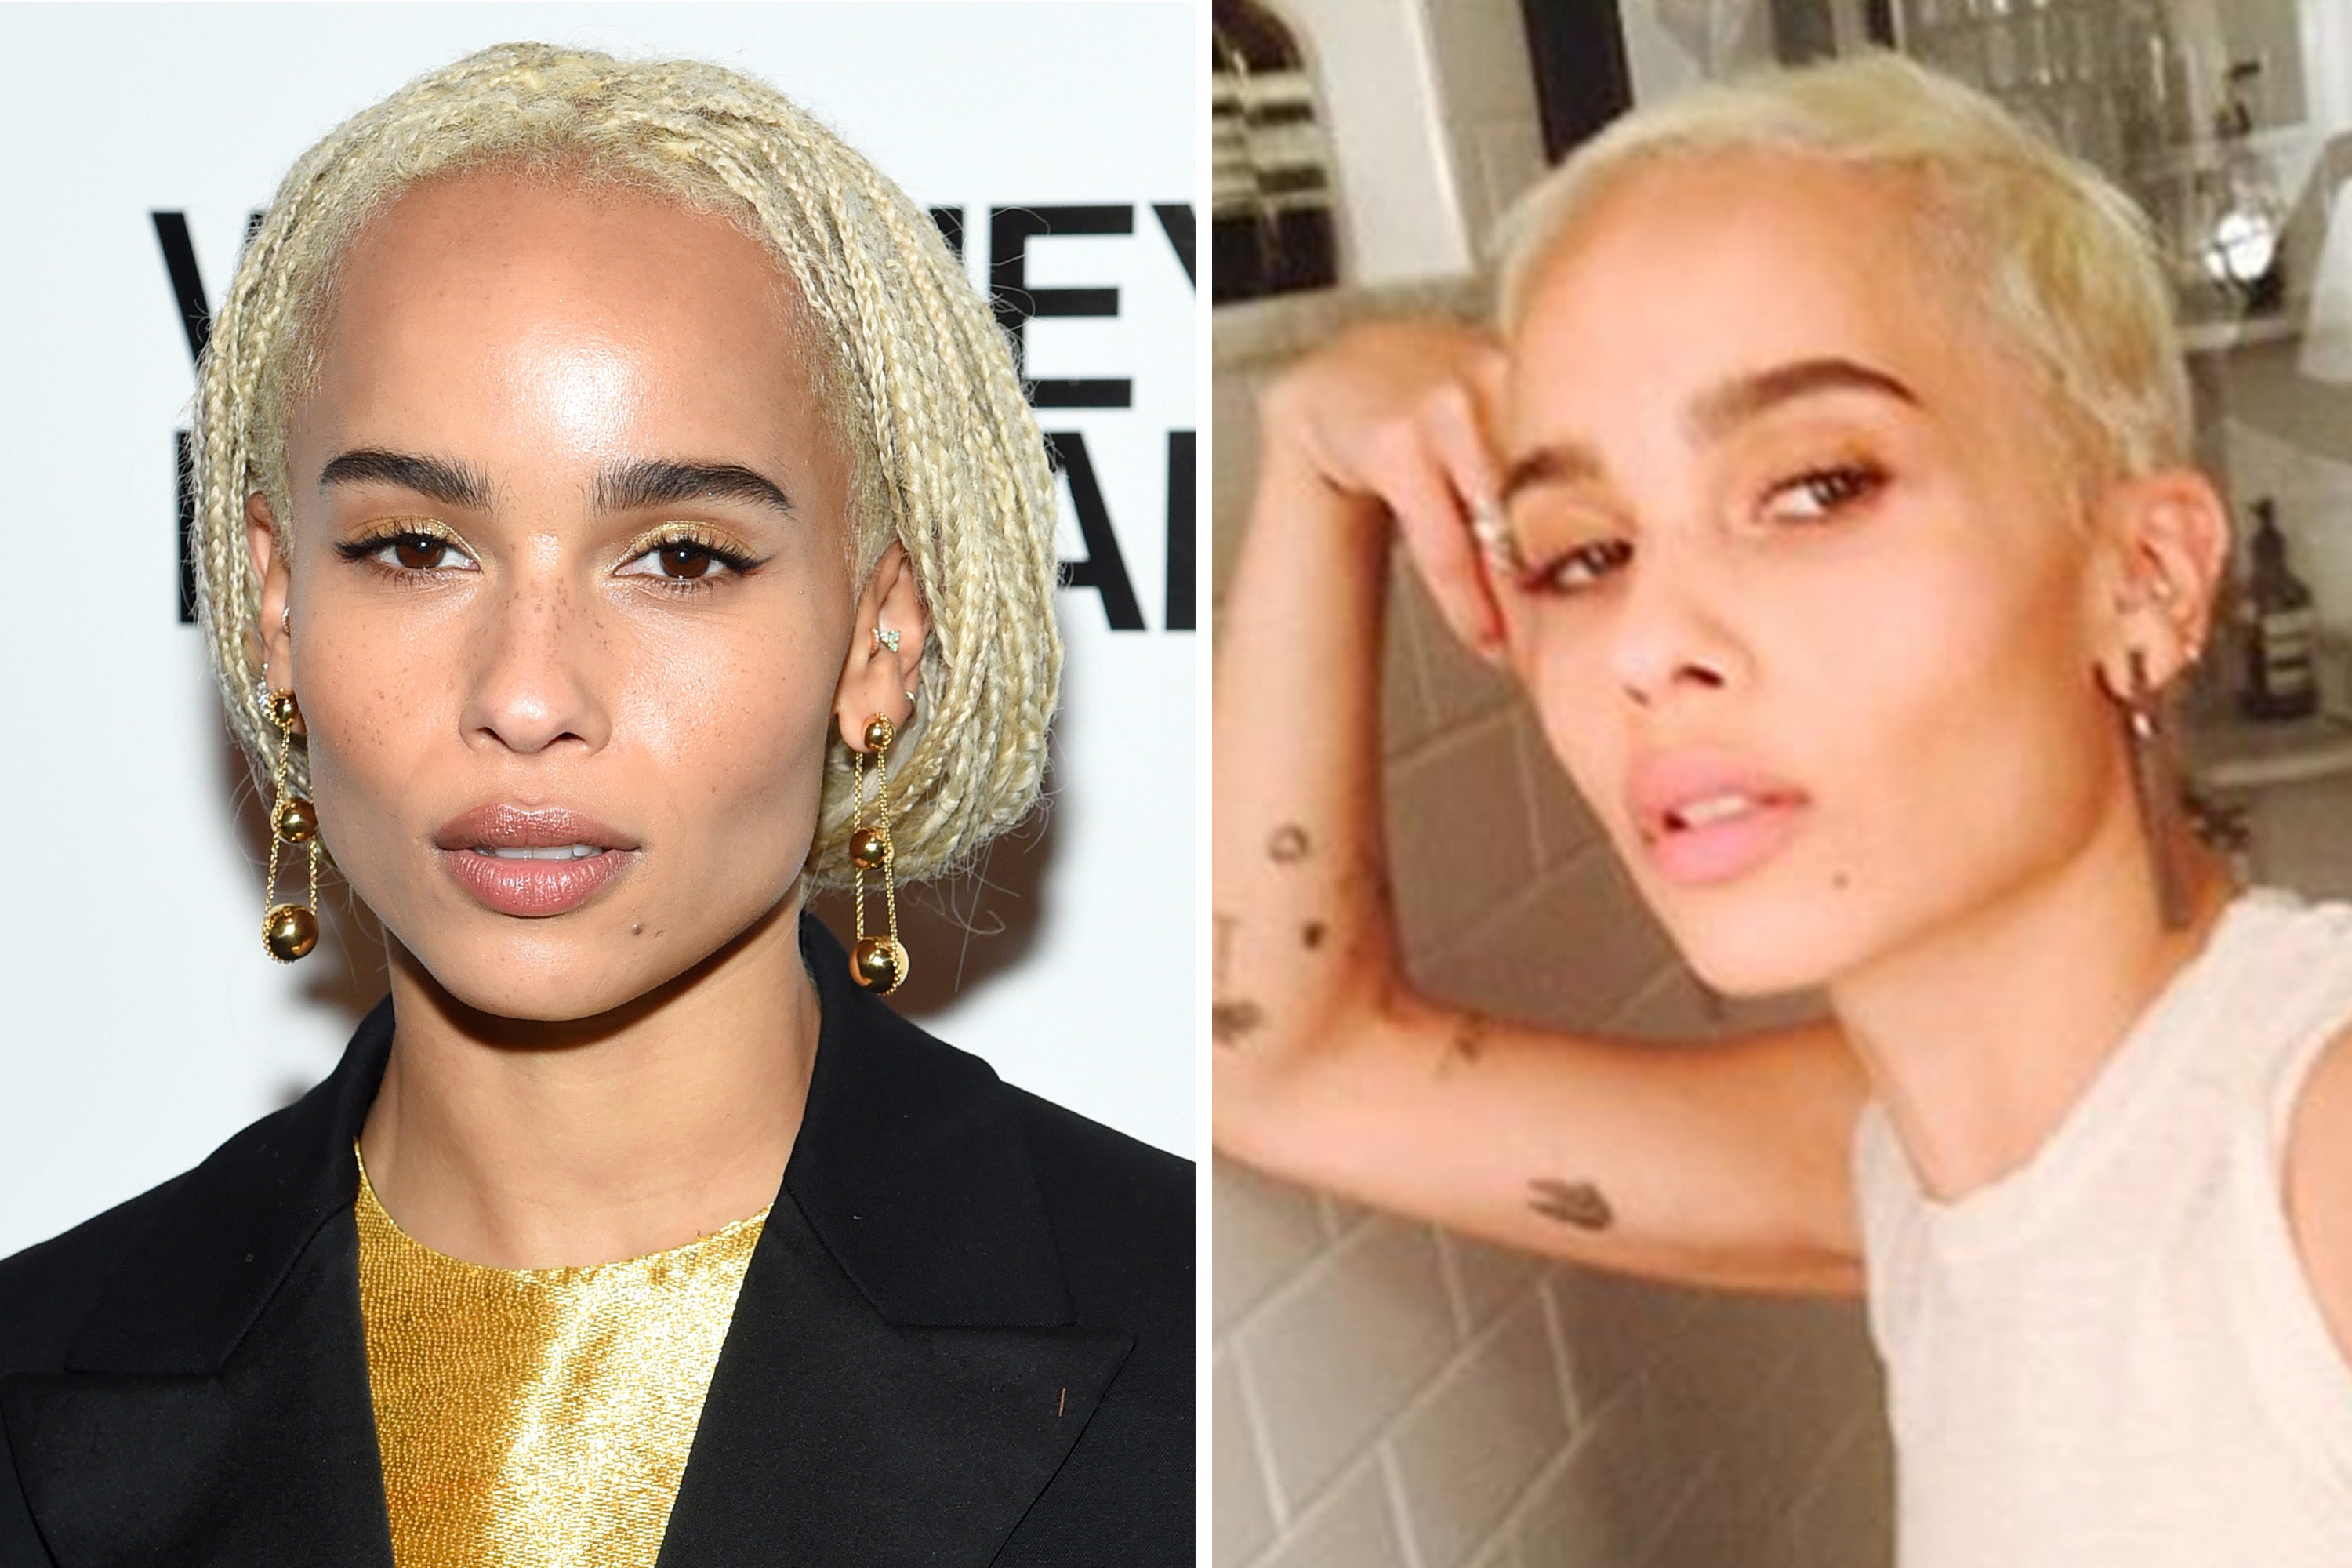 The Biggest and Boldest Celebrity Hair Transformations of 2017 So Far
